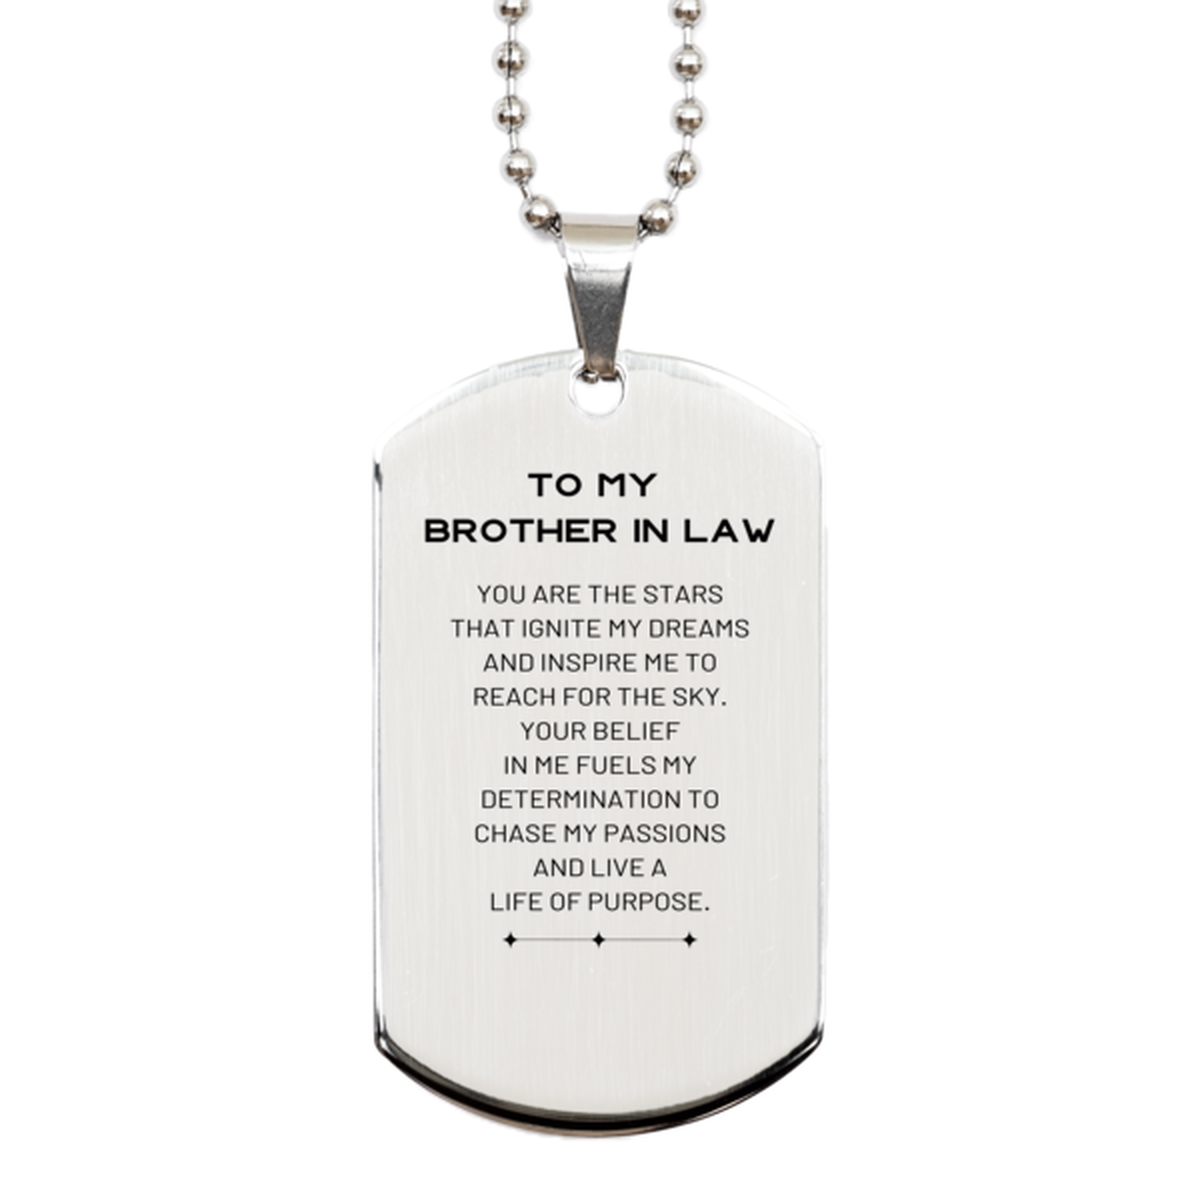 To My Brother In Law Silver Dog Tag, You are the stars that ignite my dreams and inspire me to reach for the sky, Birthday Unique Gifts For Brother In Law, Thank You Gifts For Brother In Law